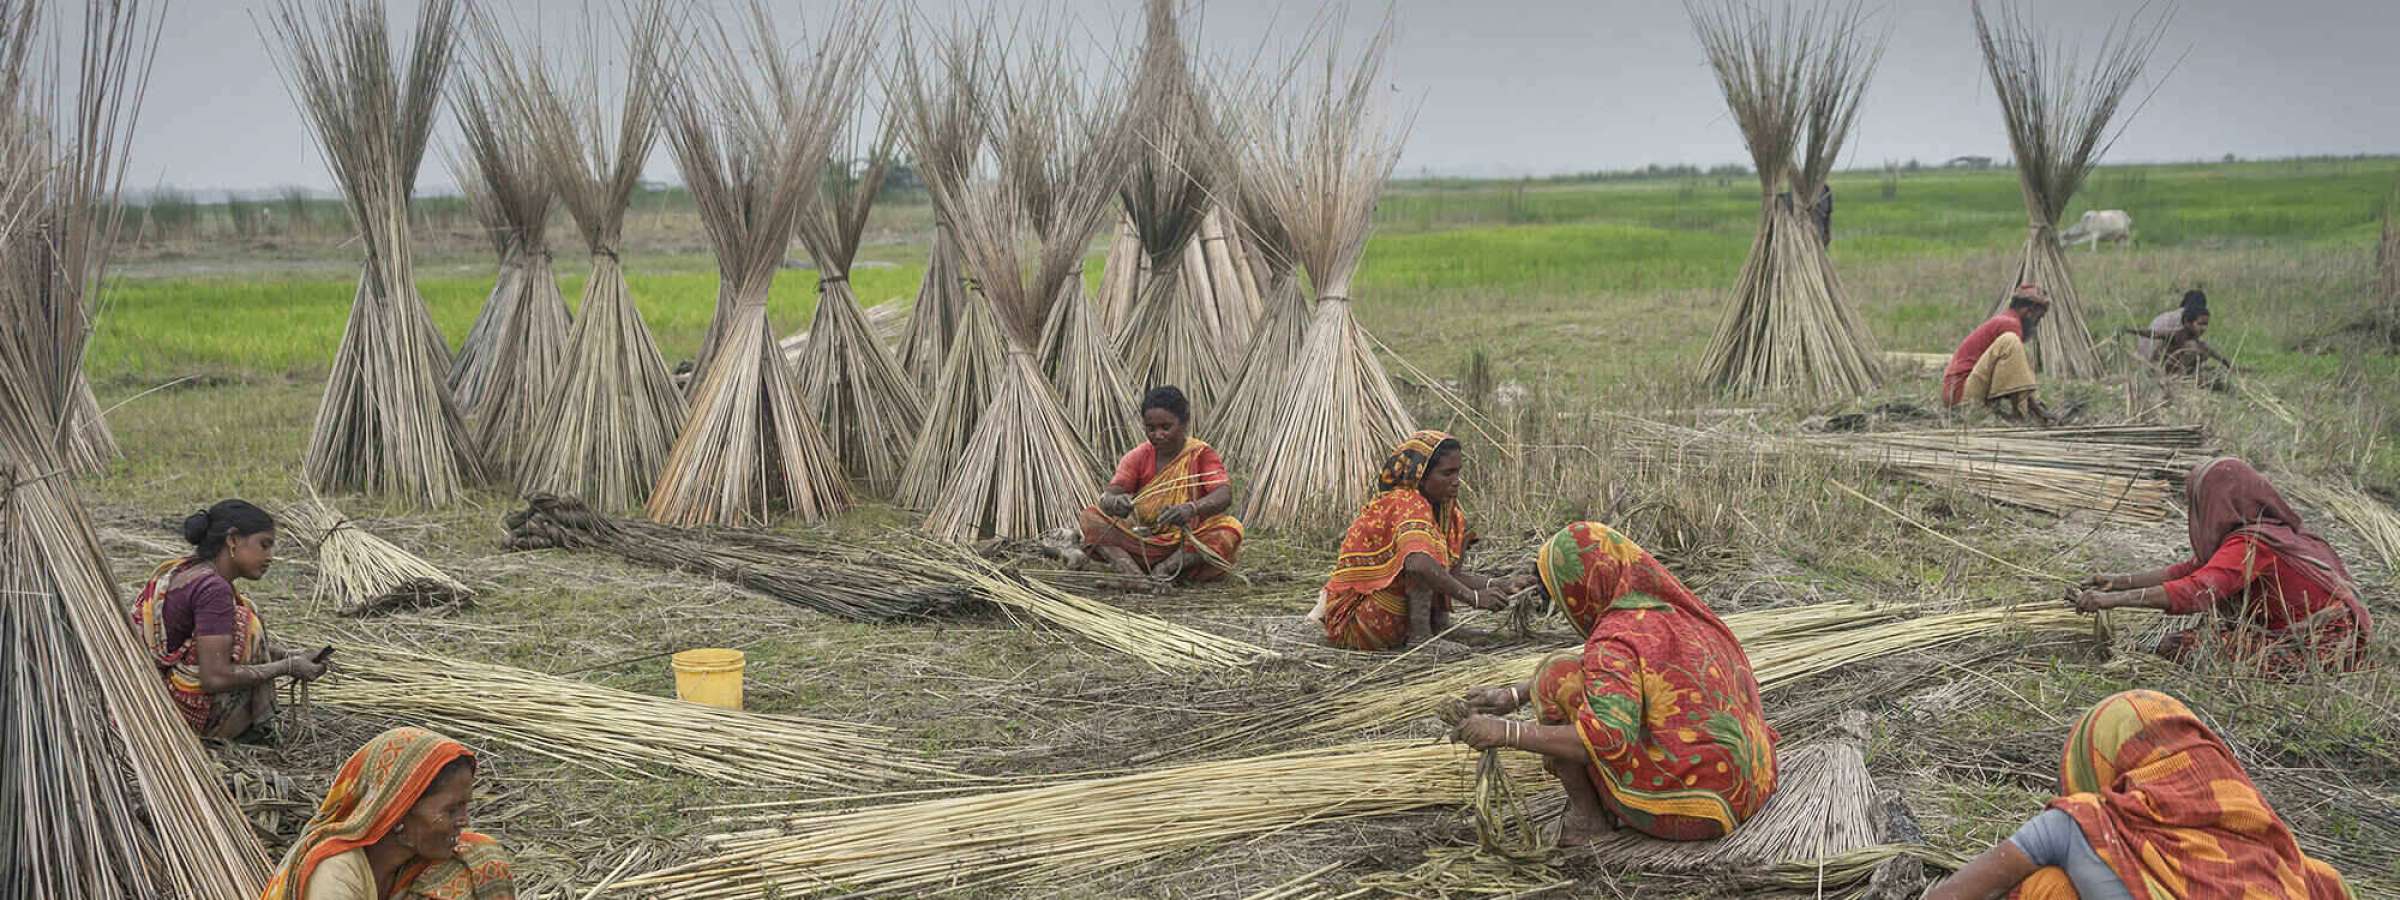 Jute- the golden fibre, women working at the jute harvest in a field, sorting the stalks.